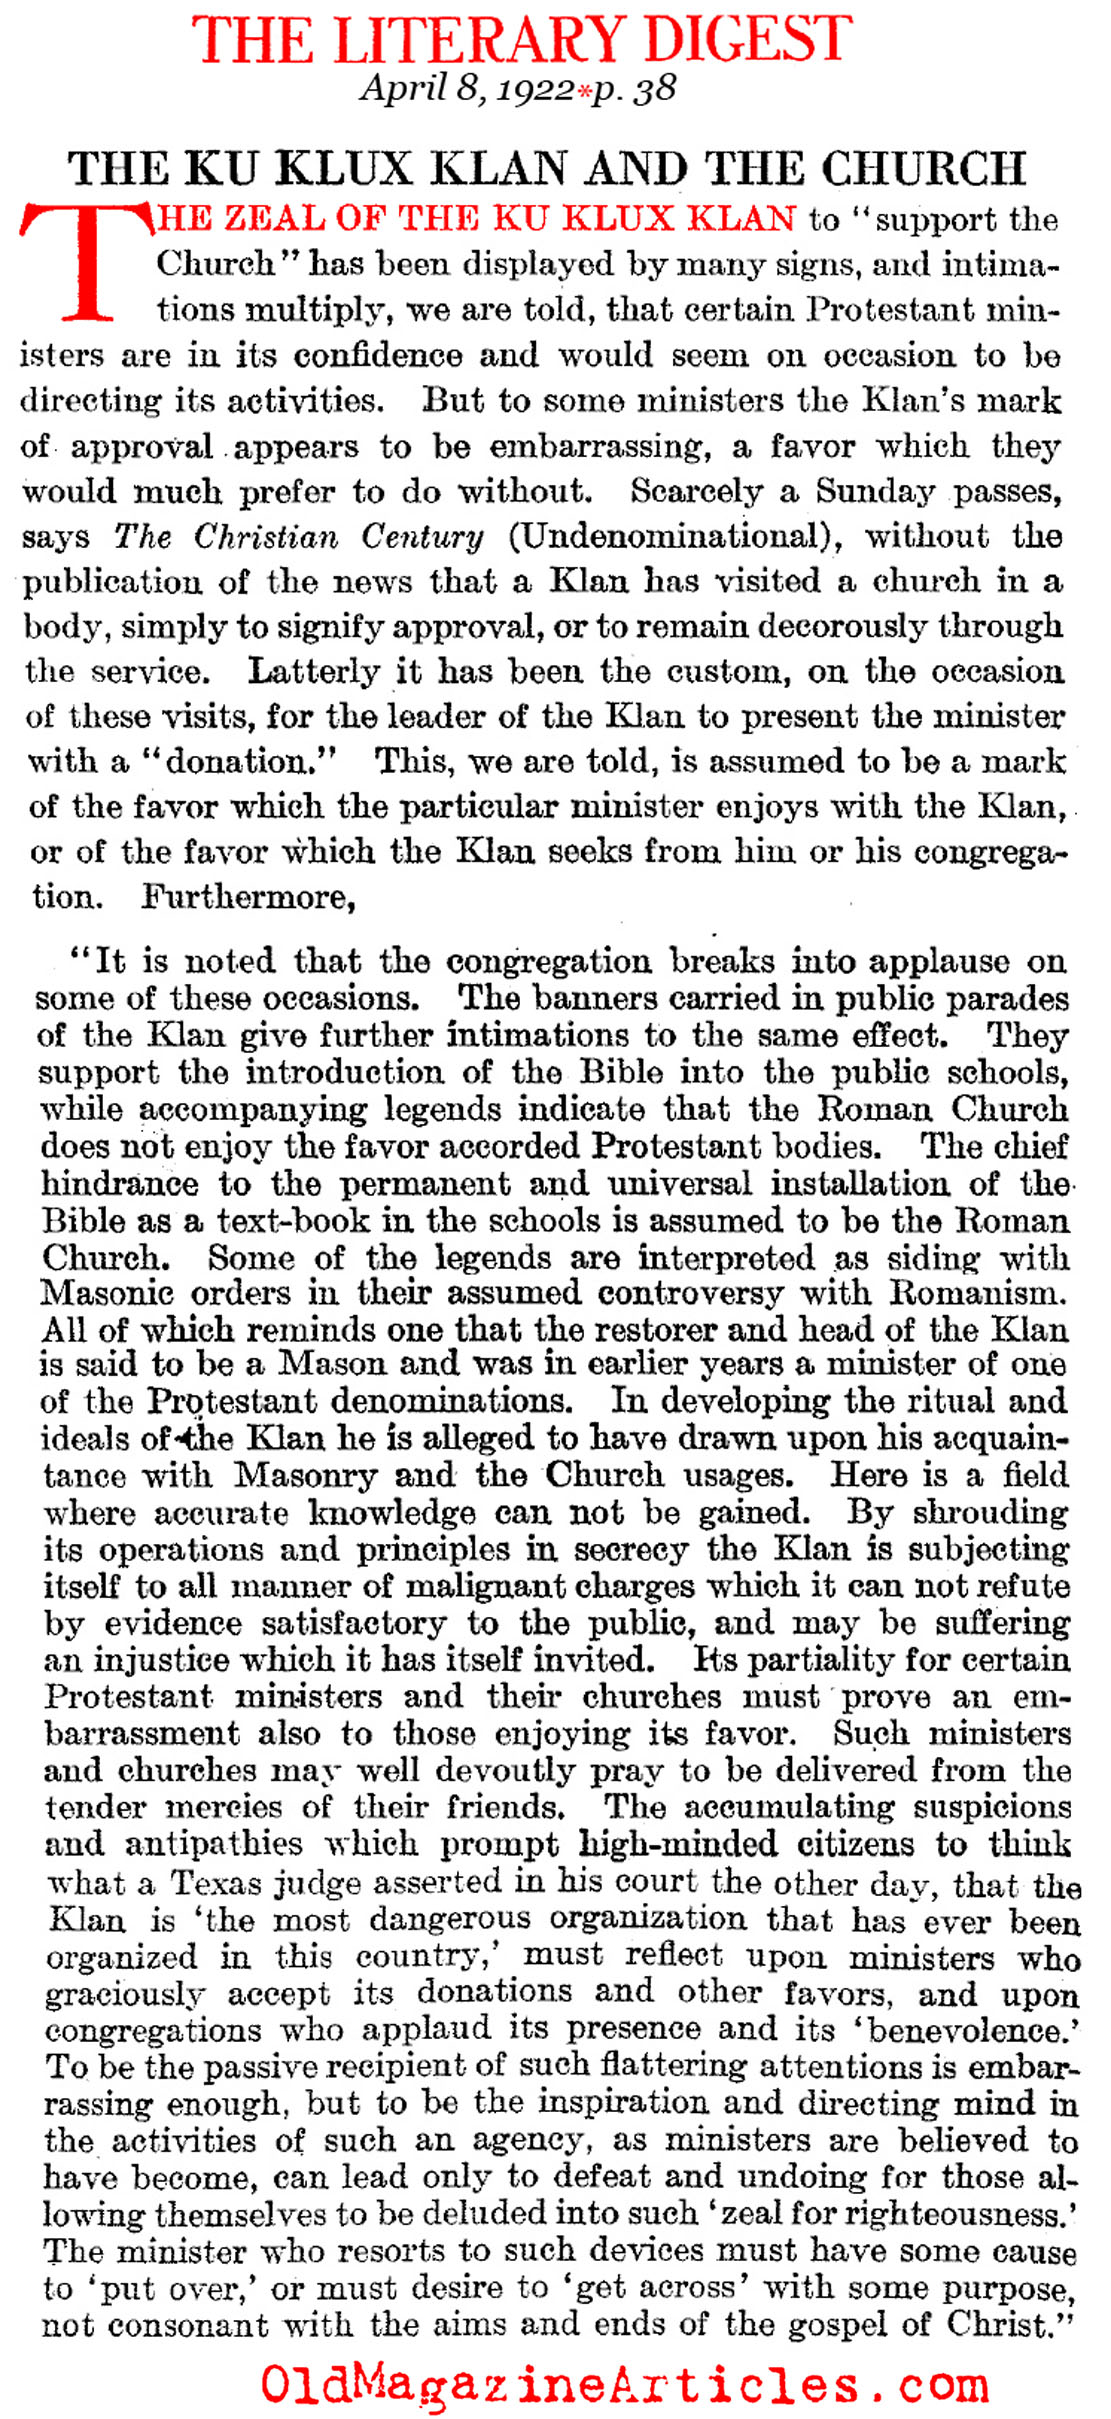 The Klan Influence Within the Protestant Churches (Literary Digest, 1922)